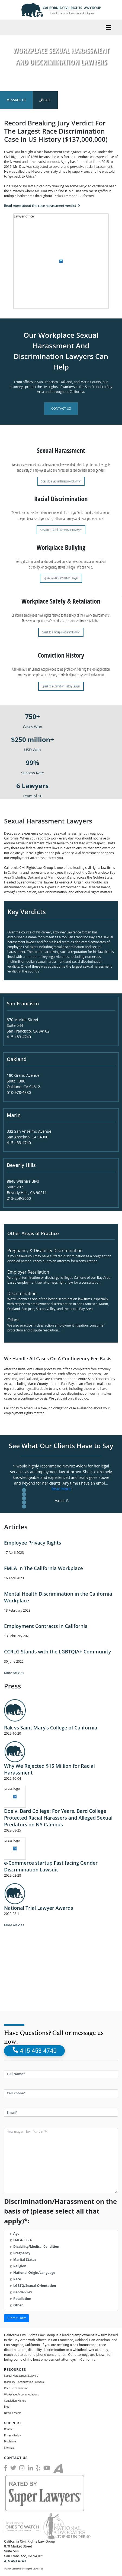 California Civil Rights Law Group - Oakland CA Lawyers